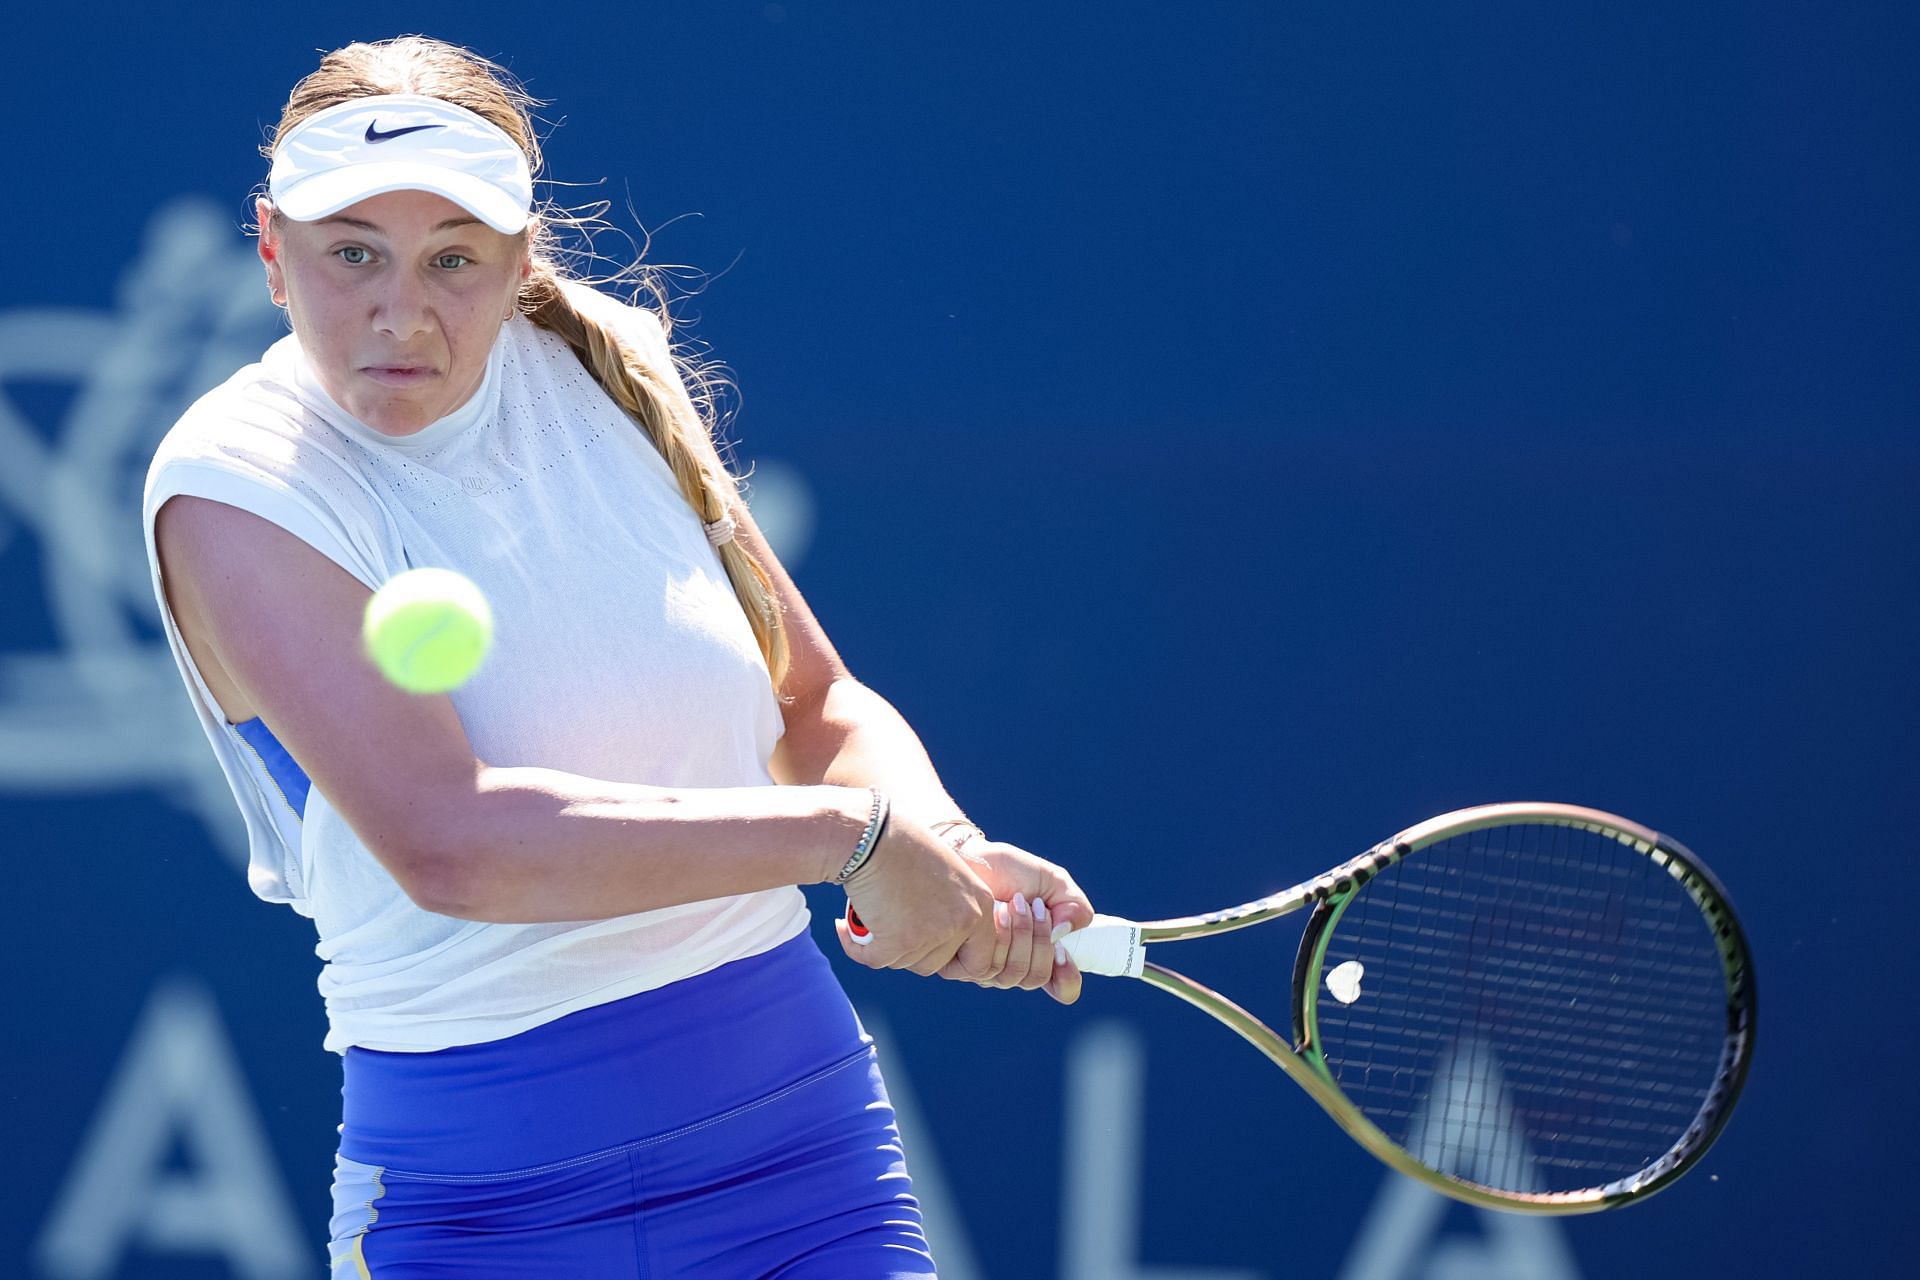 Amanda Anisimova is seeded 24th at the US Open